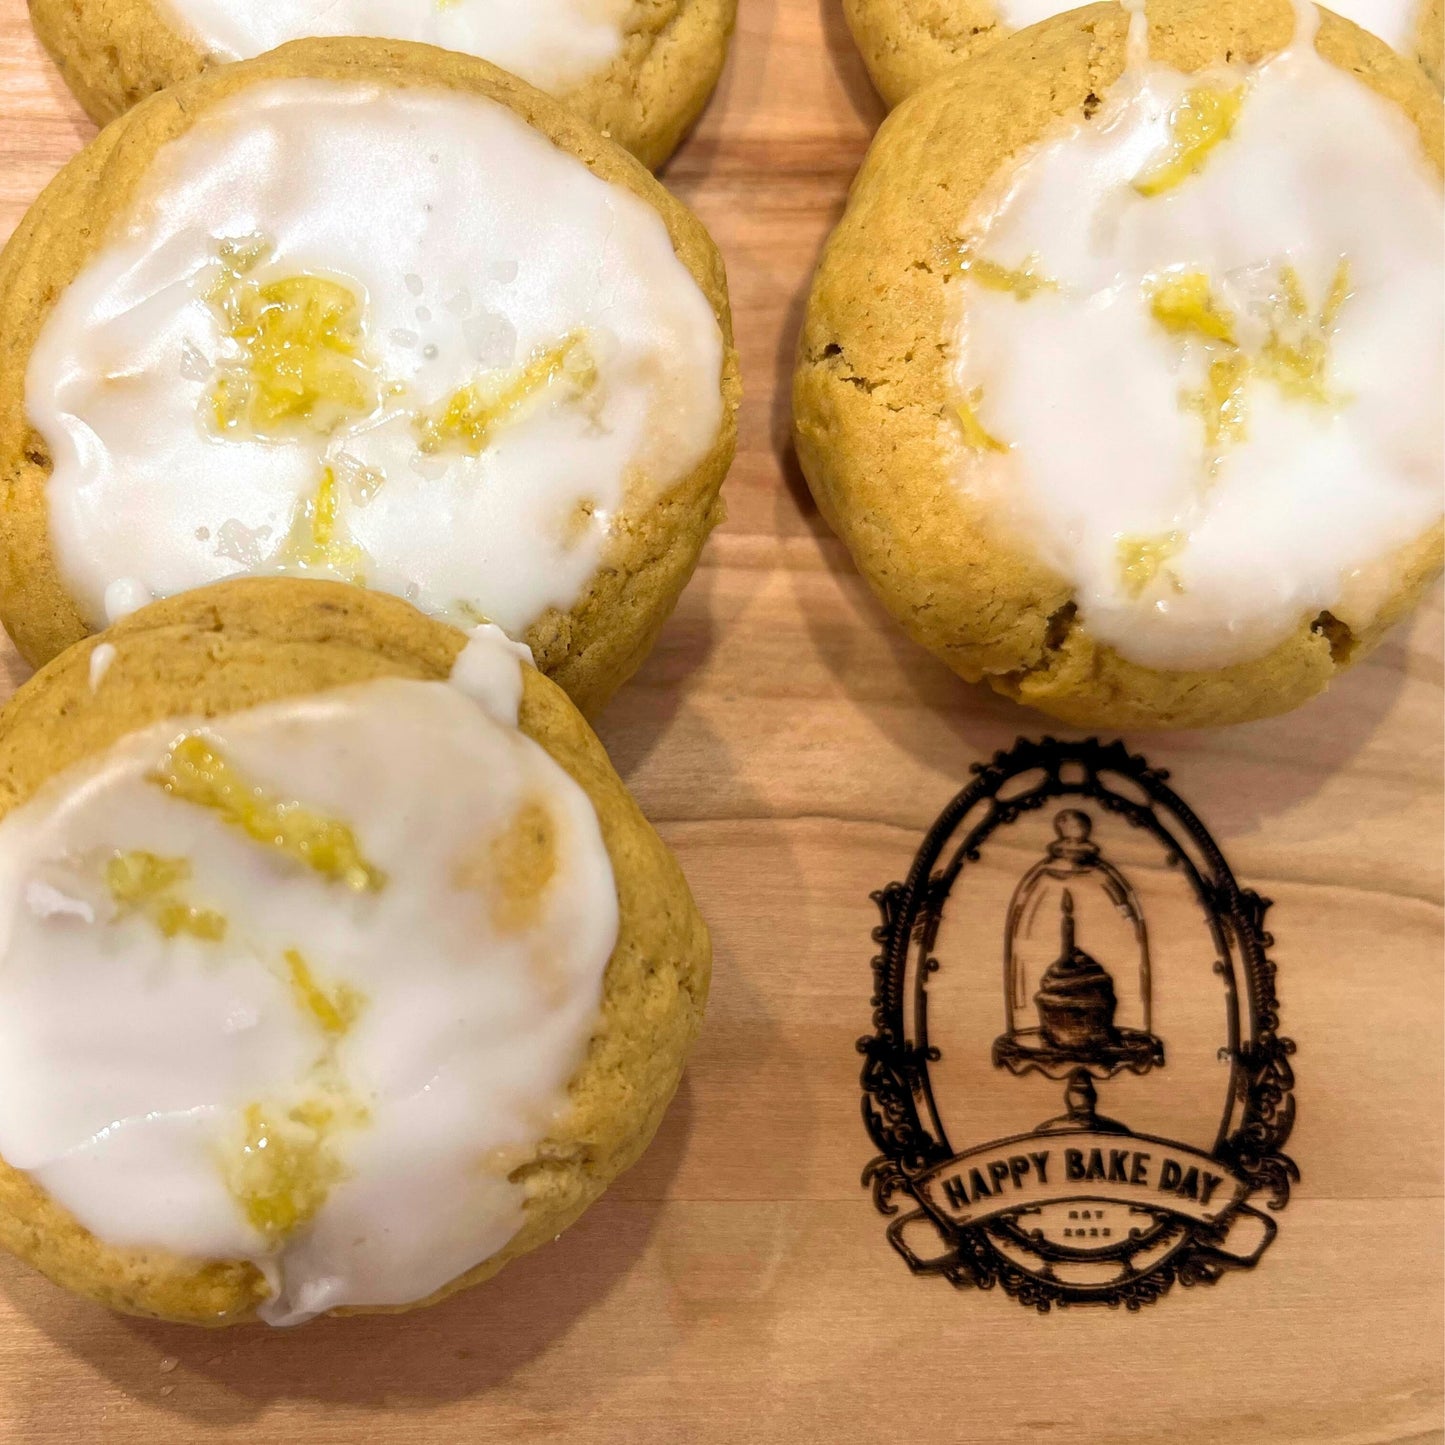 Happy Bake Day Show Lavender and Lemon Cookies